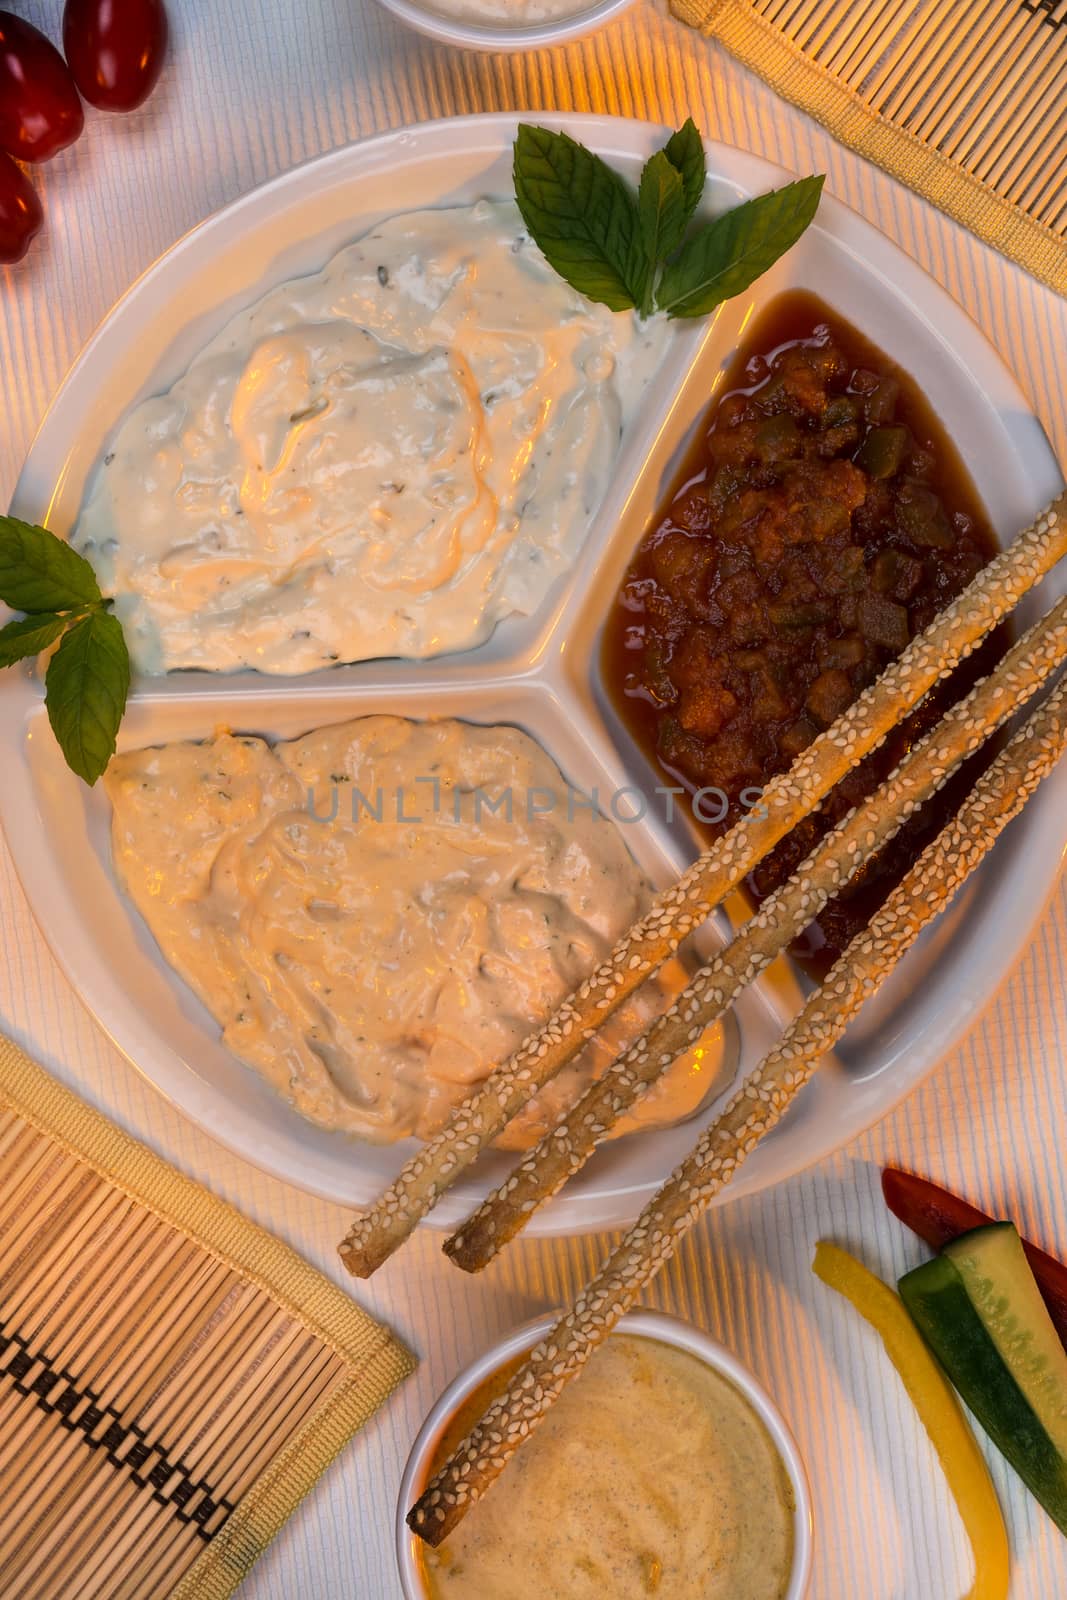 A selection of party dips with bread sticks and other crudites.